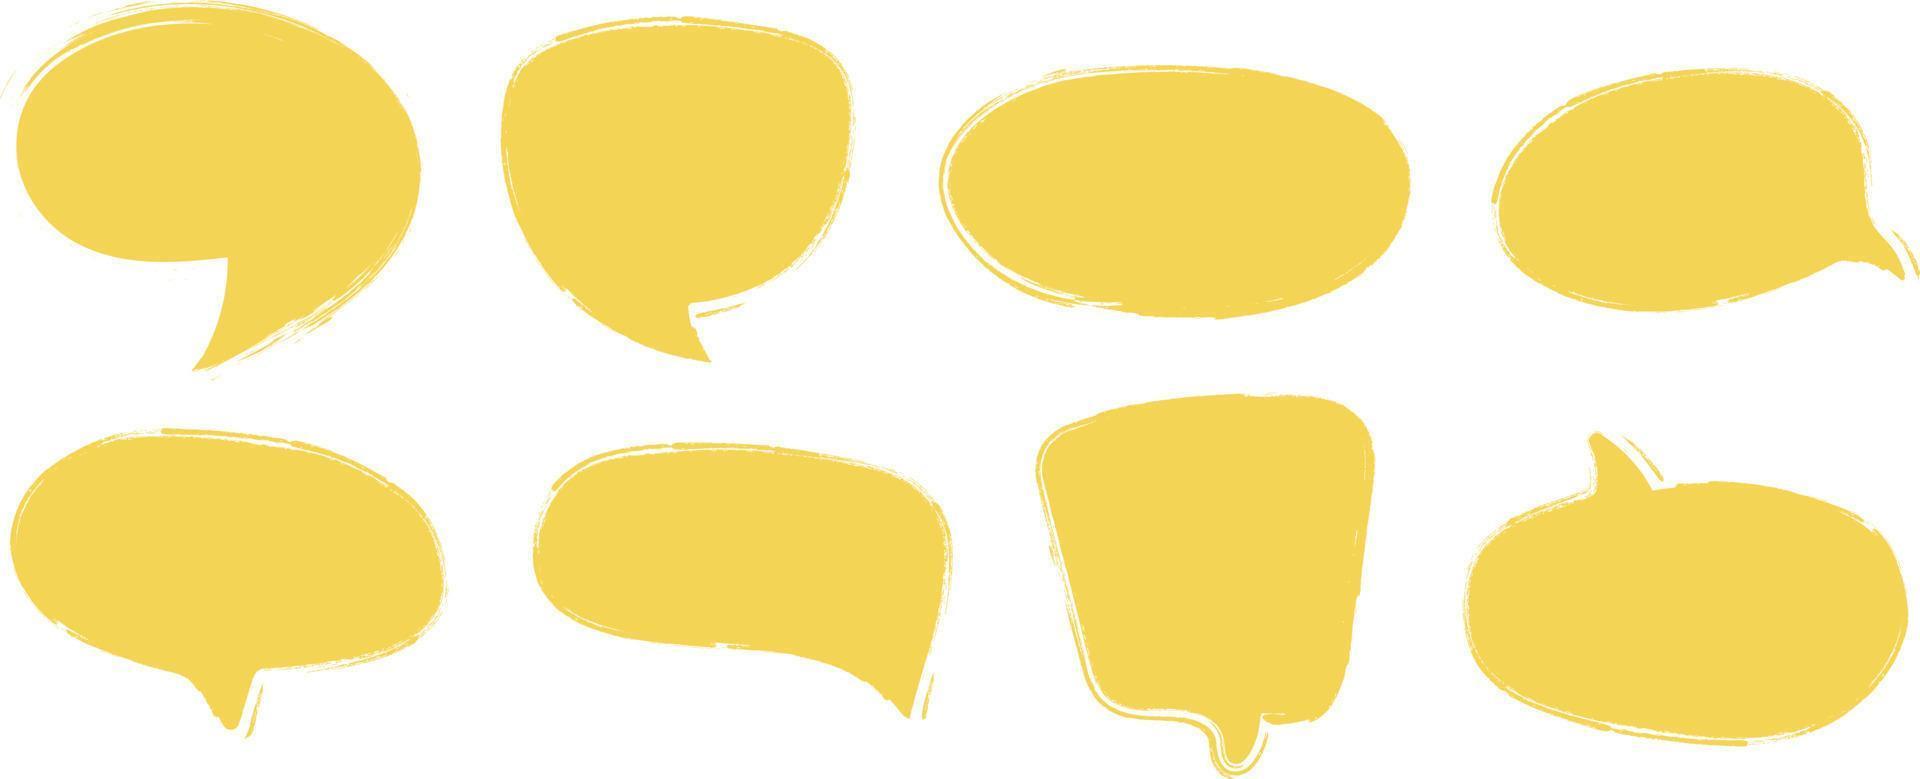 Set of hand-drawn speech bubbles. Grunge styled vector